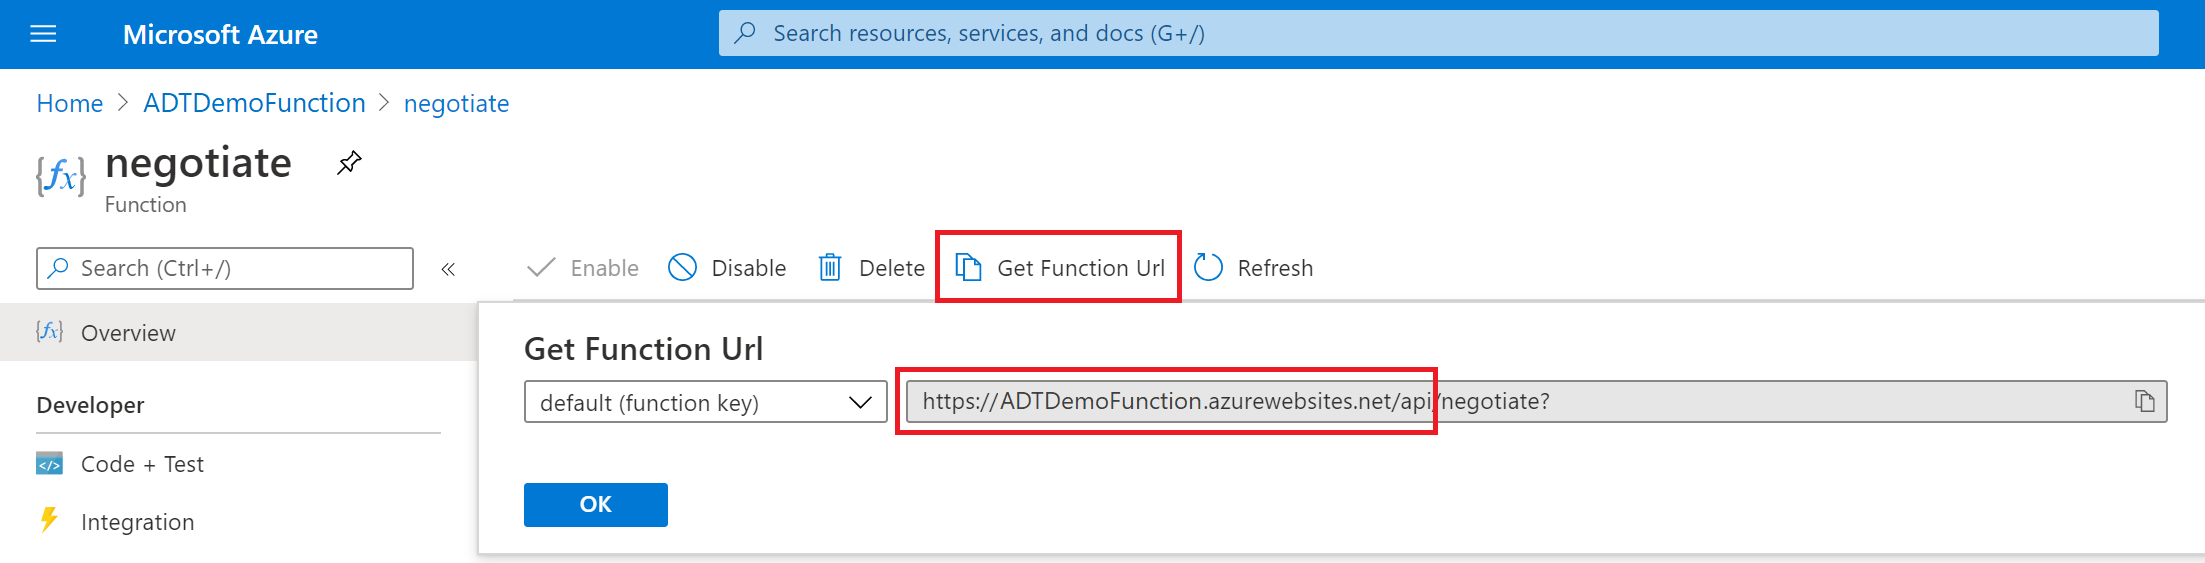 Screenshot of the Azure portal showing the 'negotiate' function with the 'Get function URL' button and the function URL highlighted.